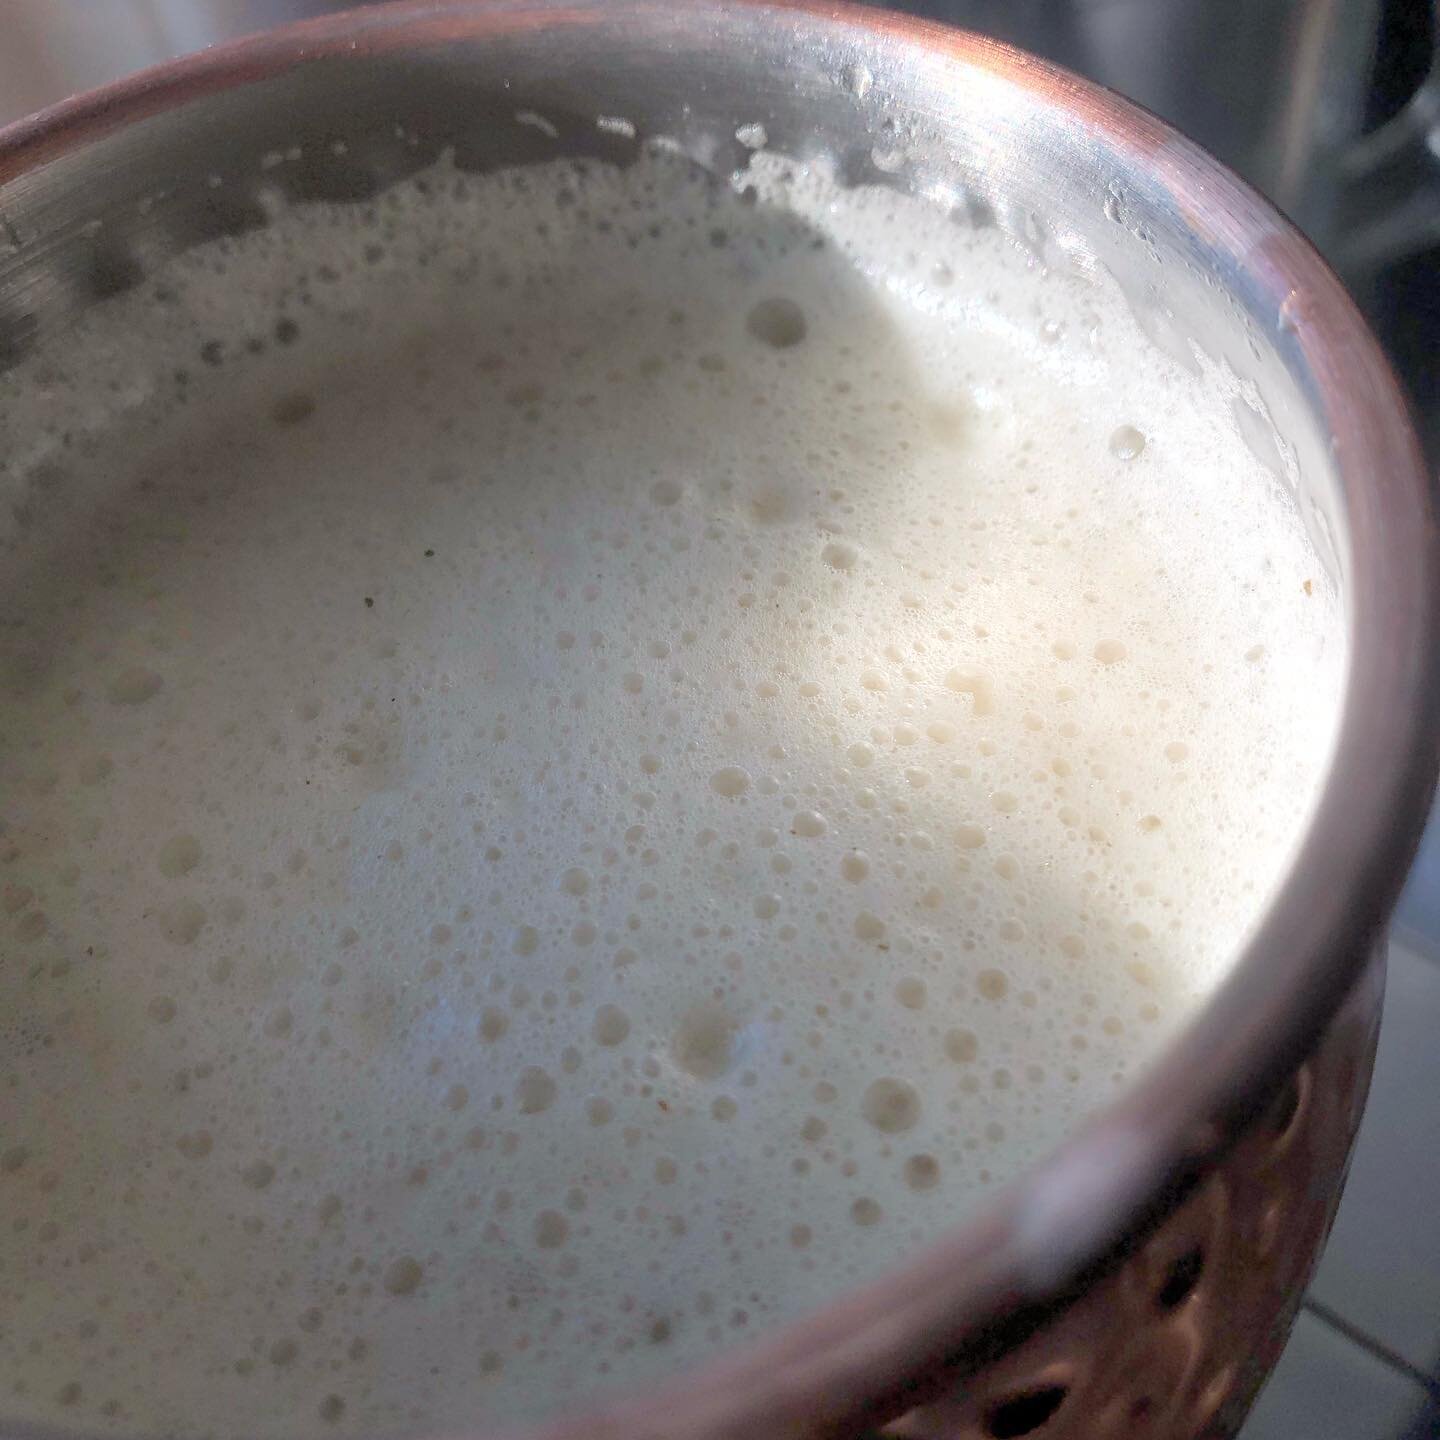 Weekly ReVibrancy Bulletproof Essiac Tea with maple syrup, brain octane, white cacao, collagen and coconut milk frothed to perfection 
..
..
What&rsquo;s your morning drink that lifts you up?
..
..
@bulletproof @danone.canada @giddyyoyo @craftsight @